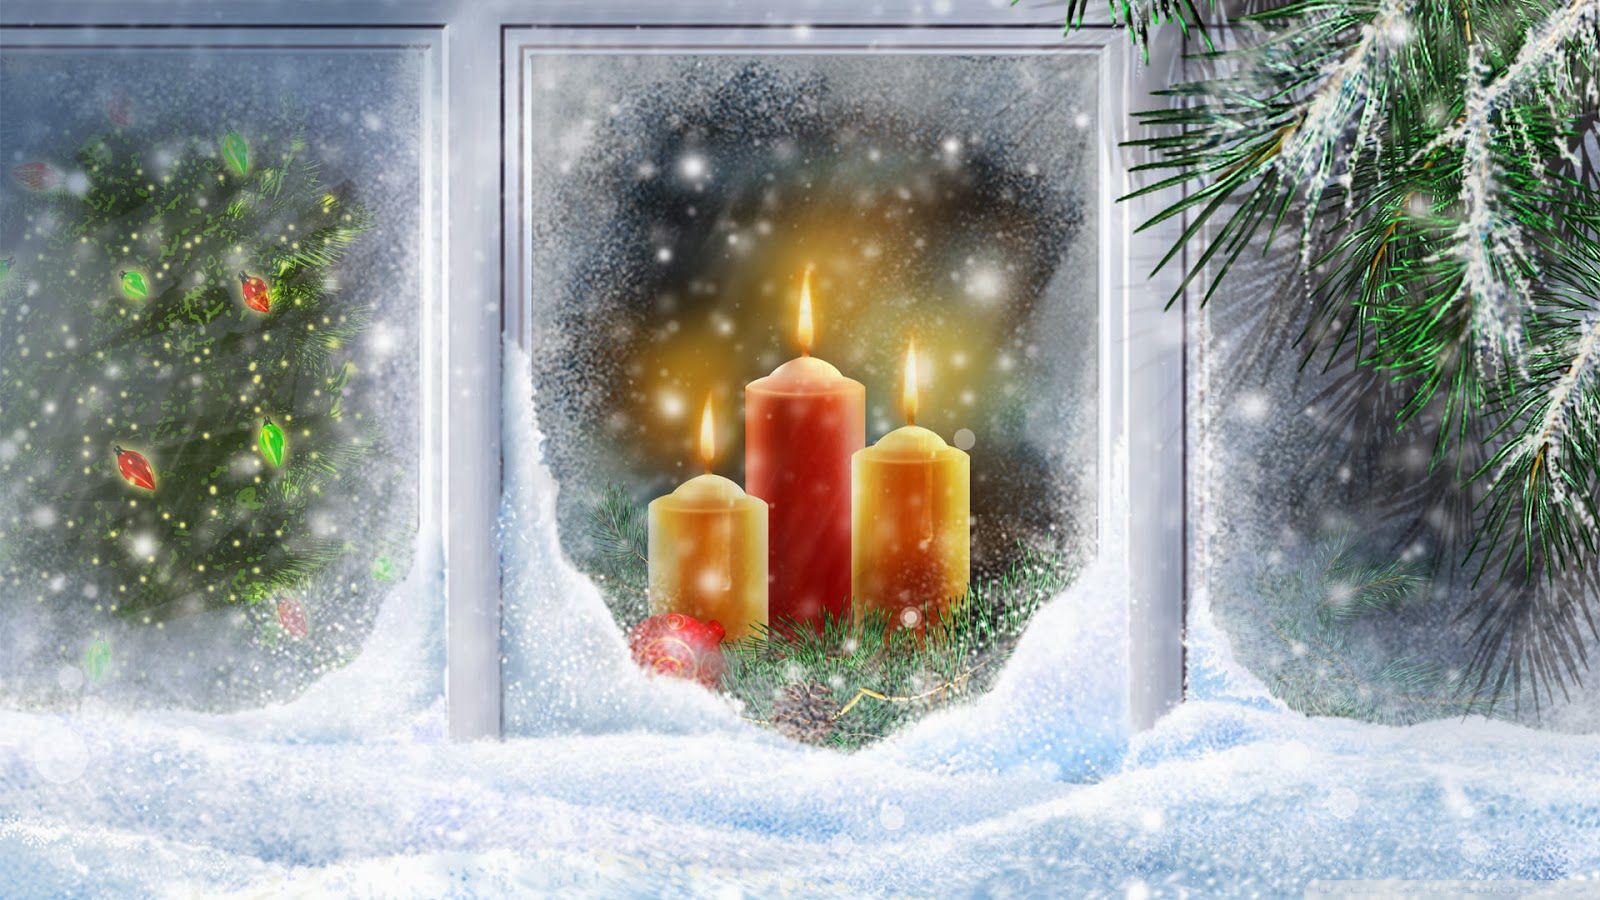 special_wishes_at_christmas-wallpaper-1920x1080